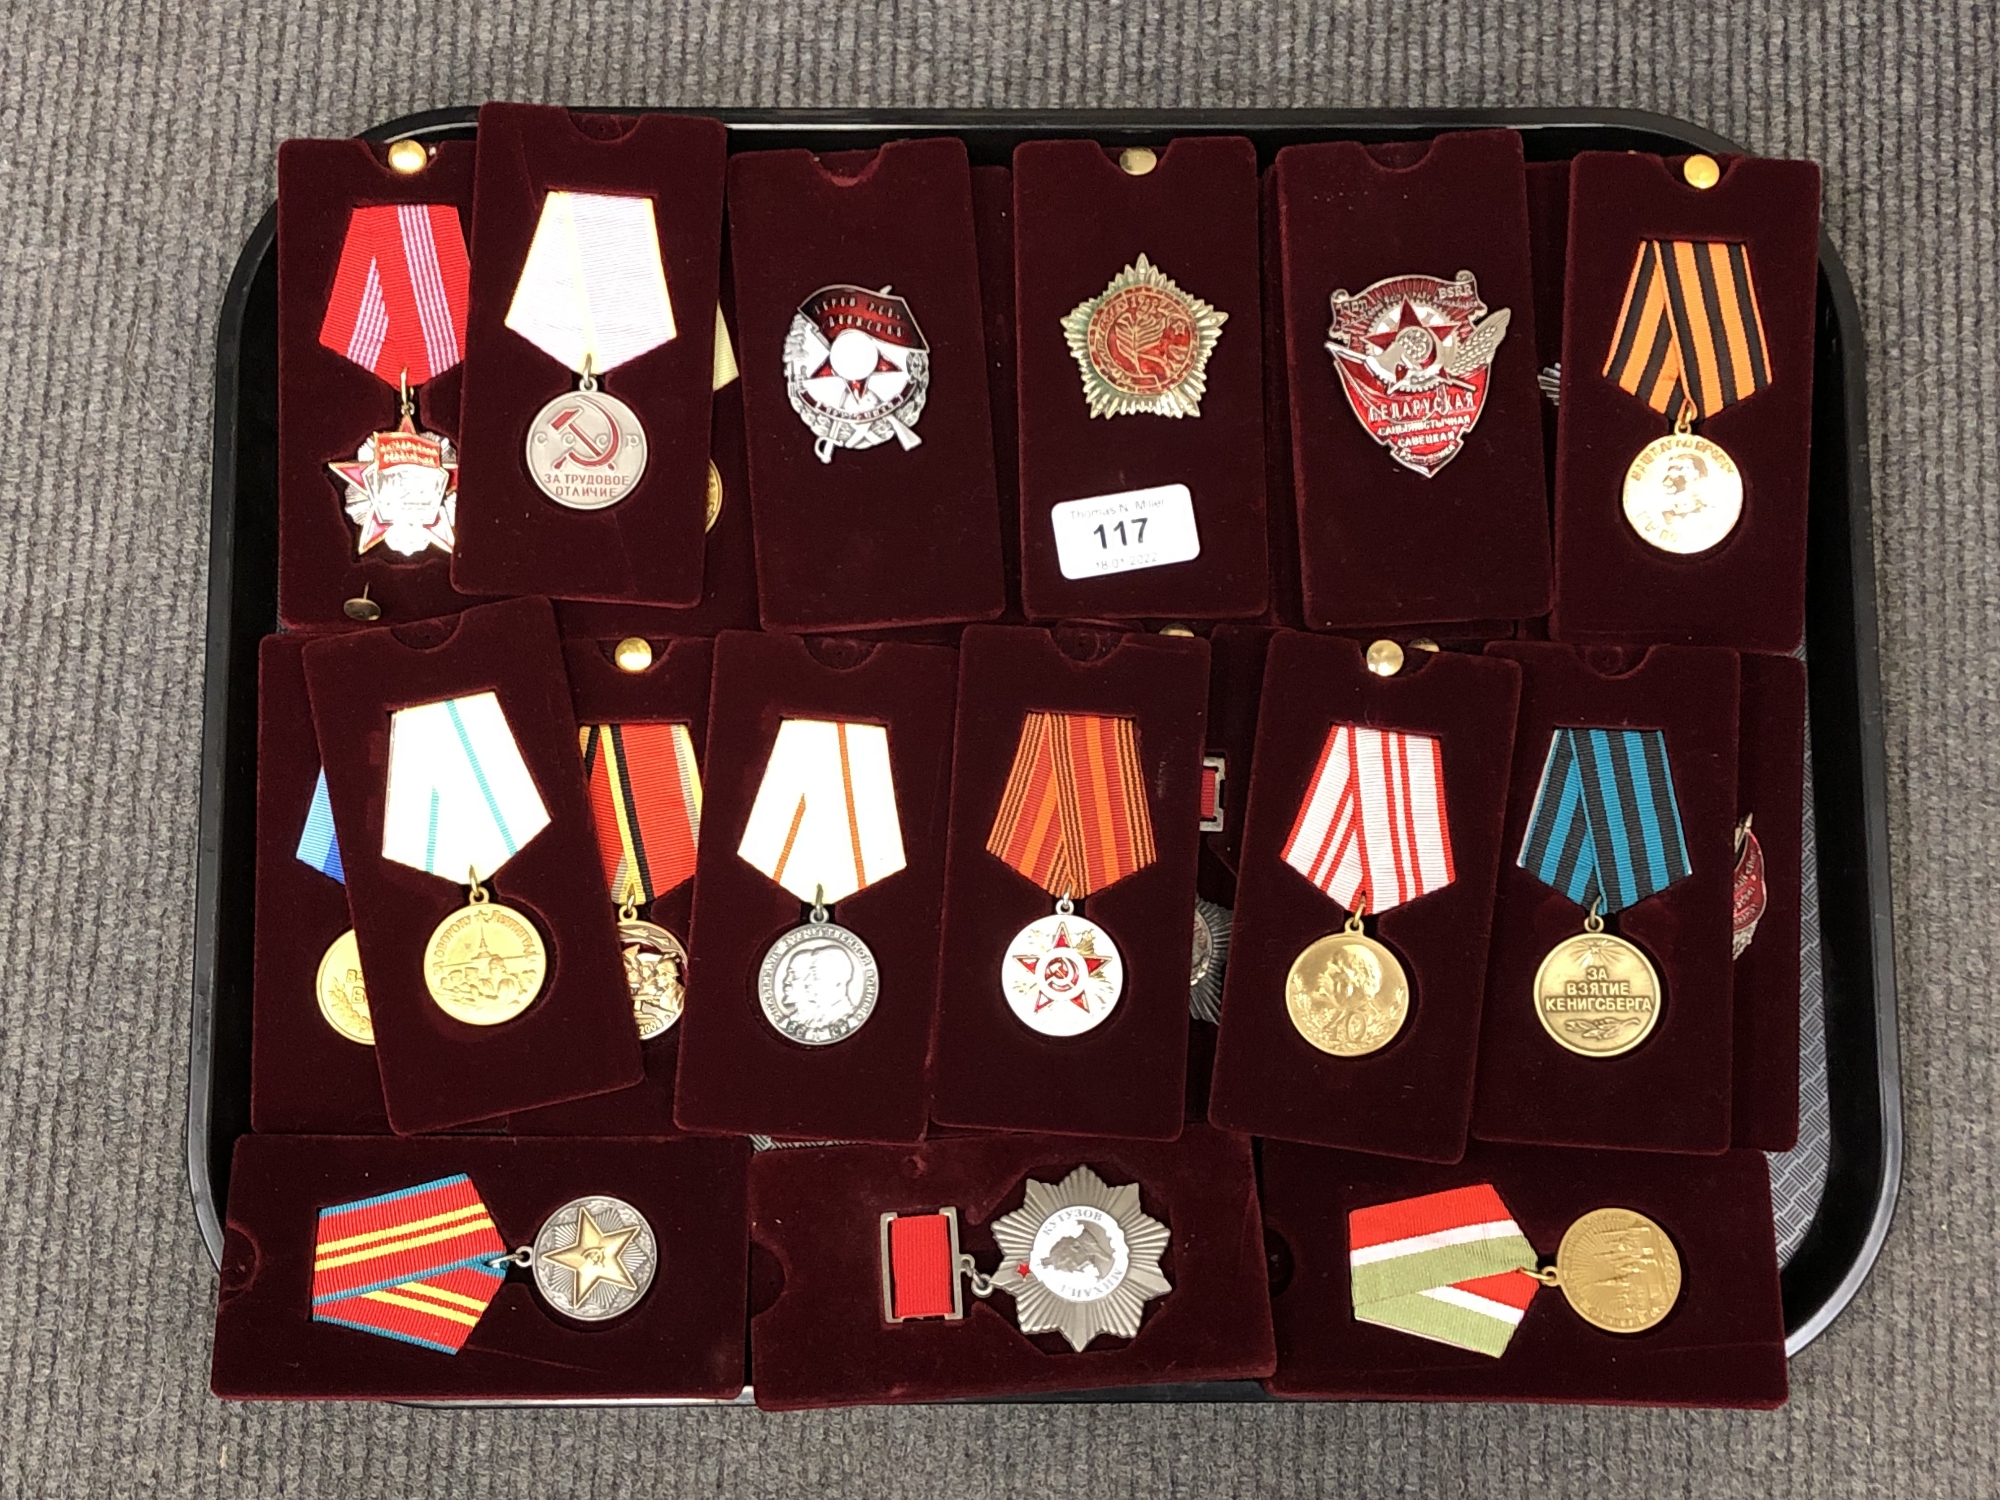 A tray of approximately 25 reproduction Russian badges/medals.